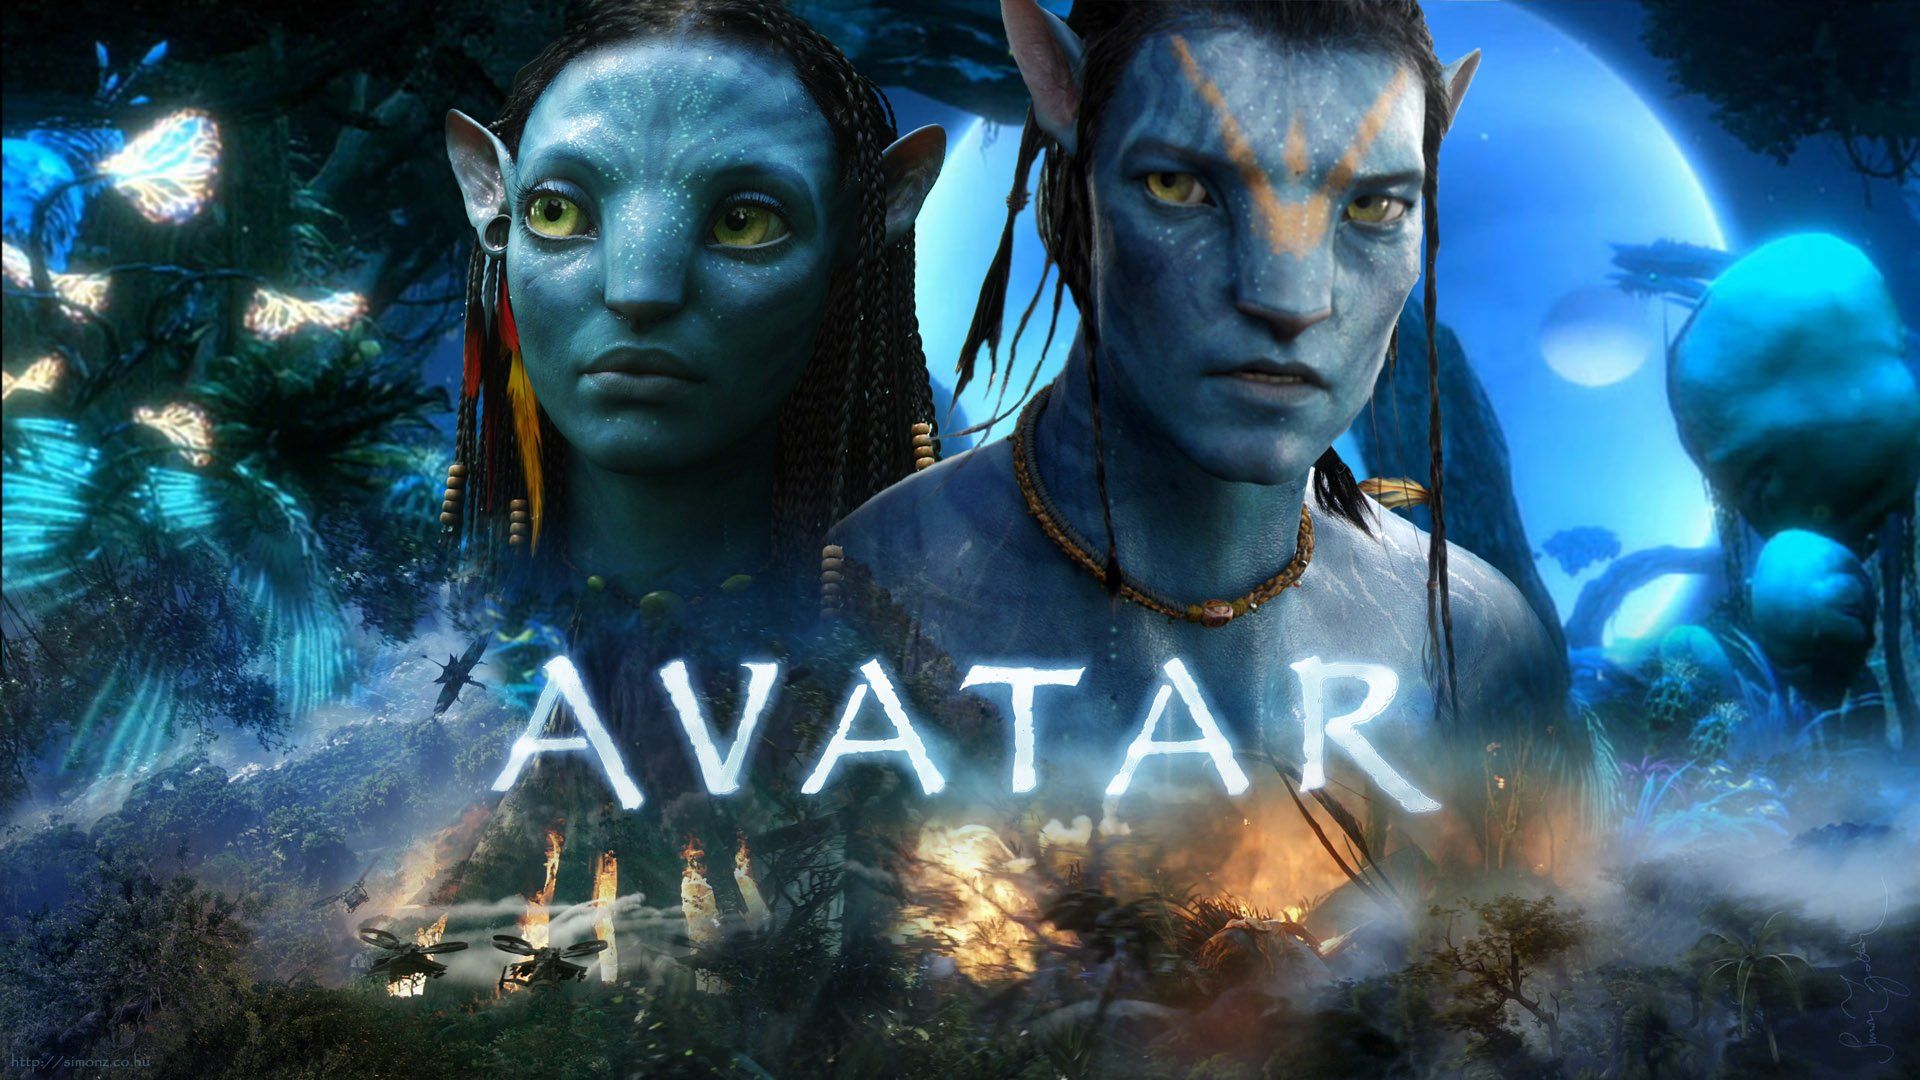 Avatar Movie Poster James Cameron 2009 Film and 26 similar items